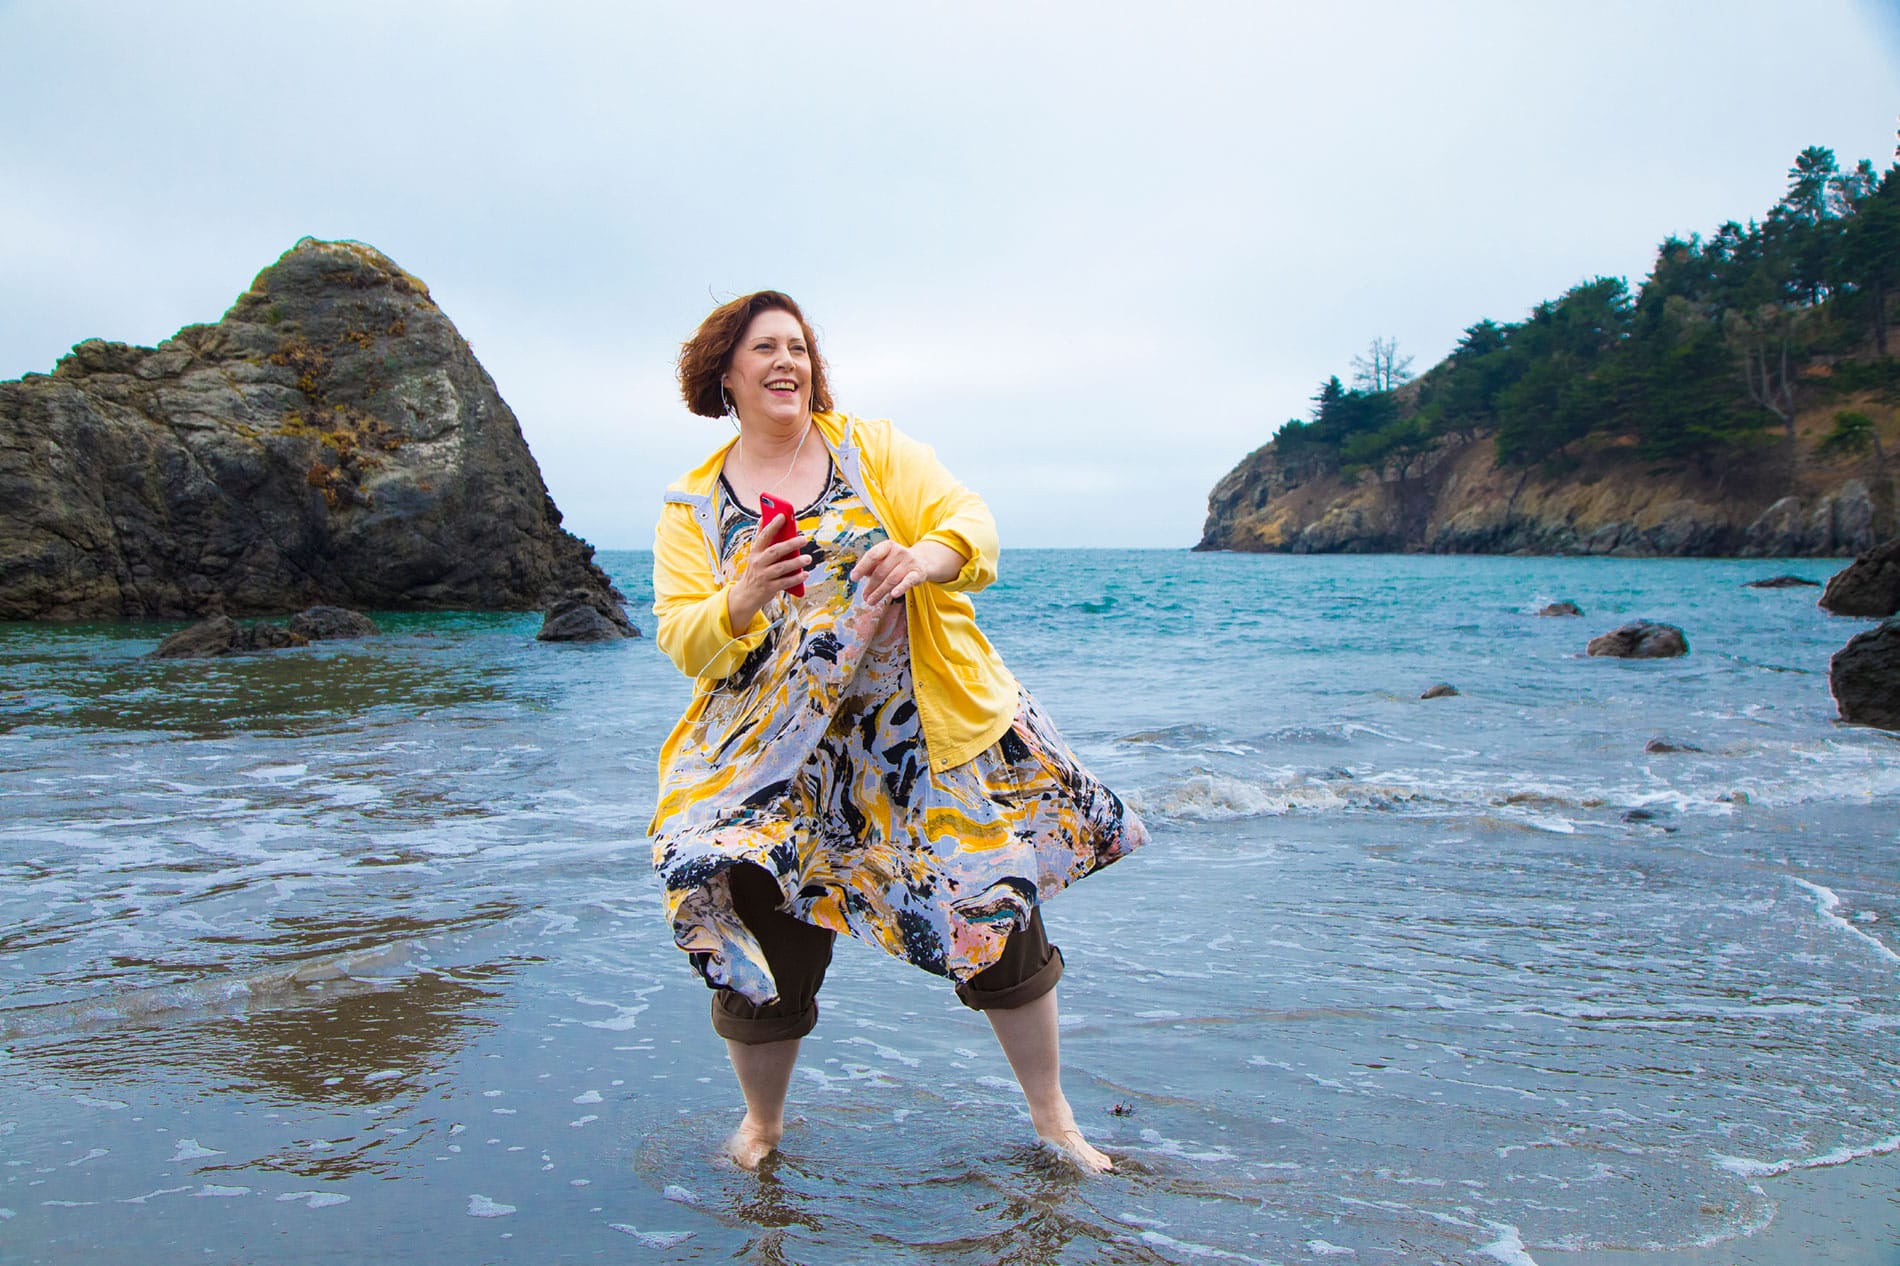 Margaret Wagner teaches pop-up conscious dance classes in Marin County, California, and beyond